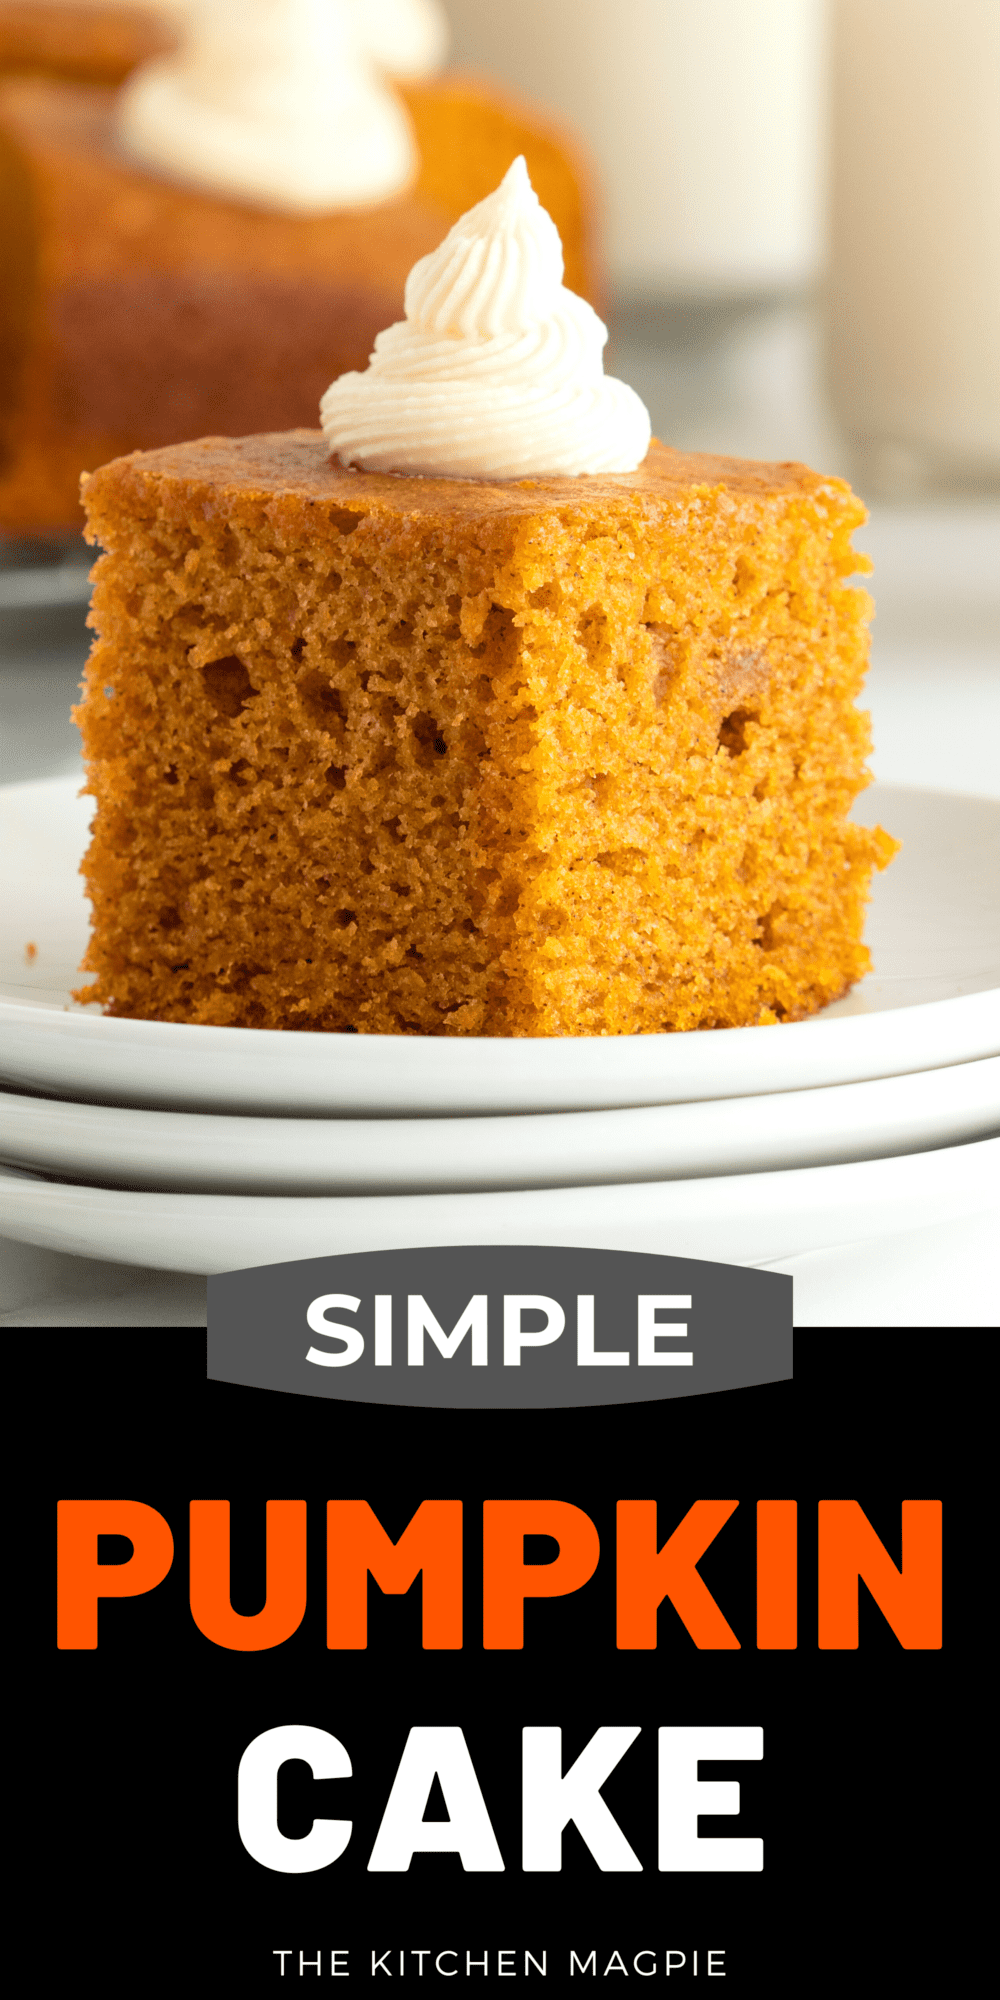 This light and airy Pumpkin Cake is a great dinnertime dessert any time of the year.